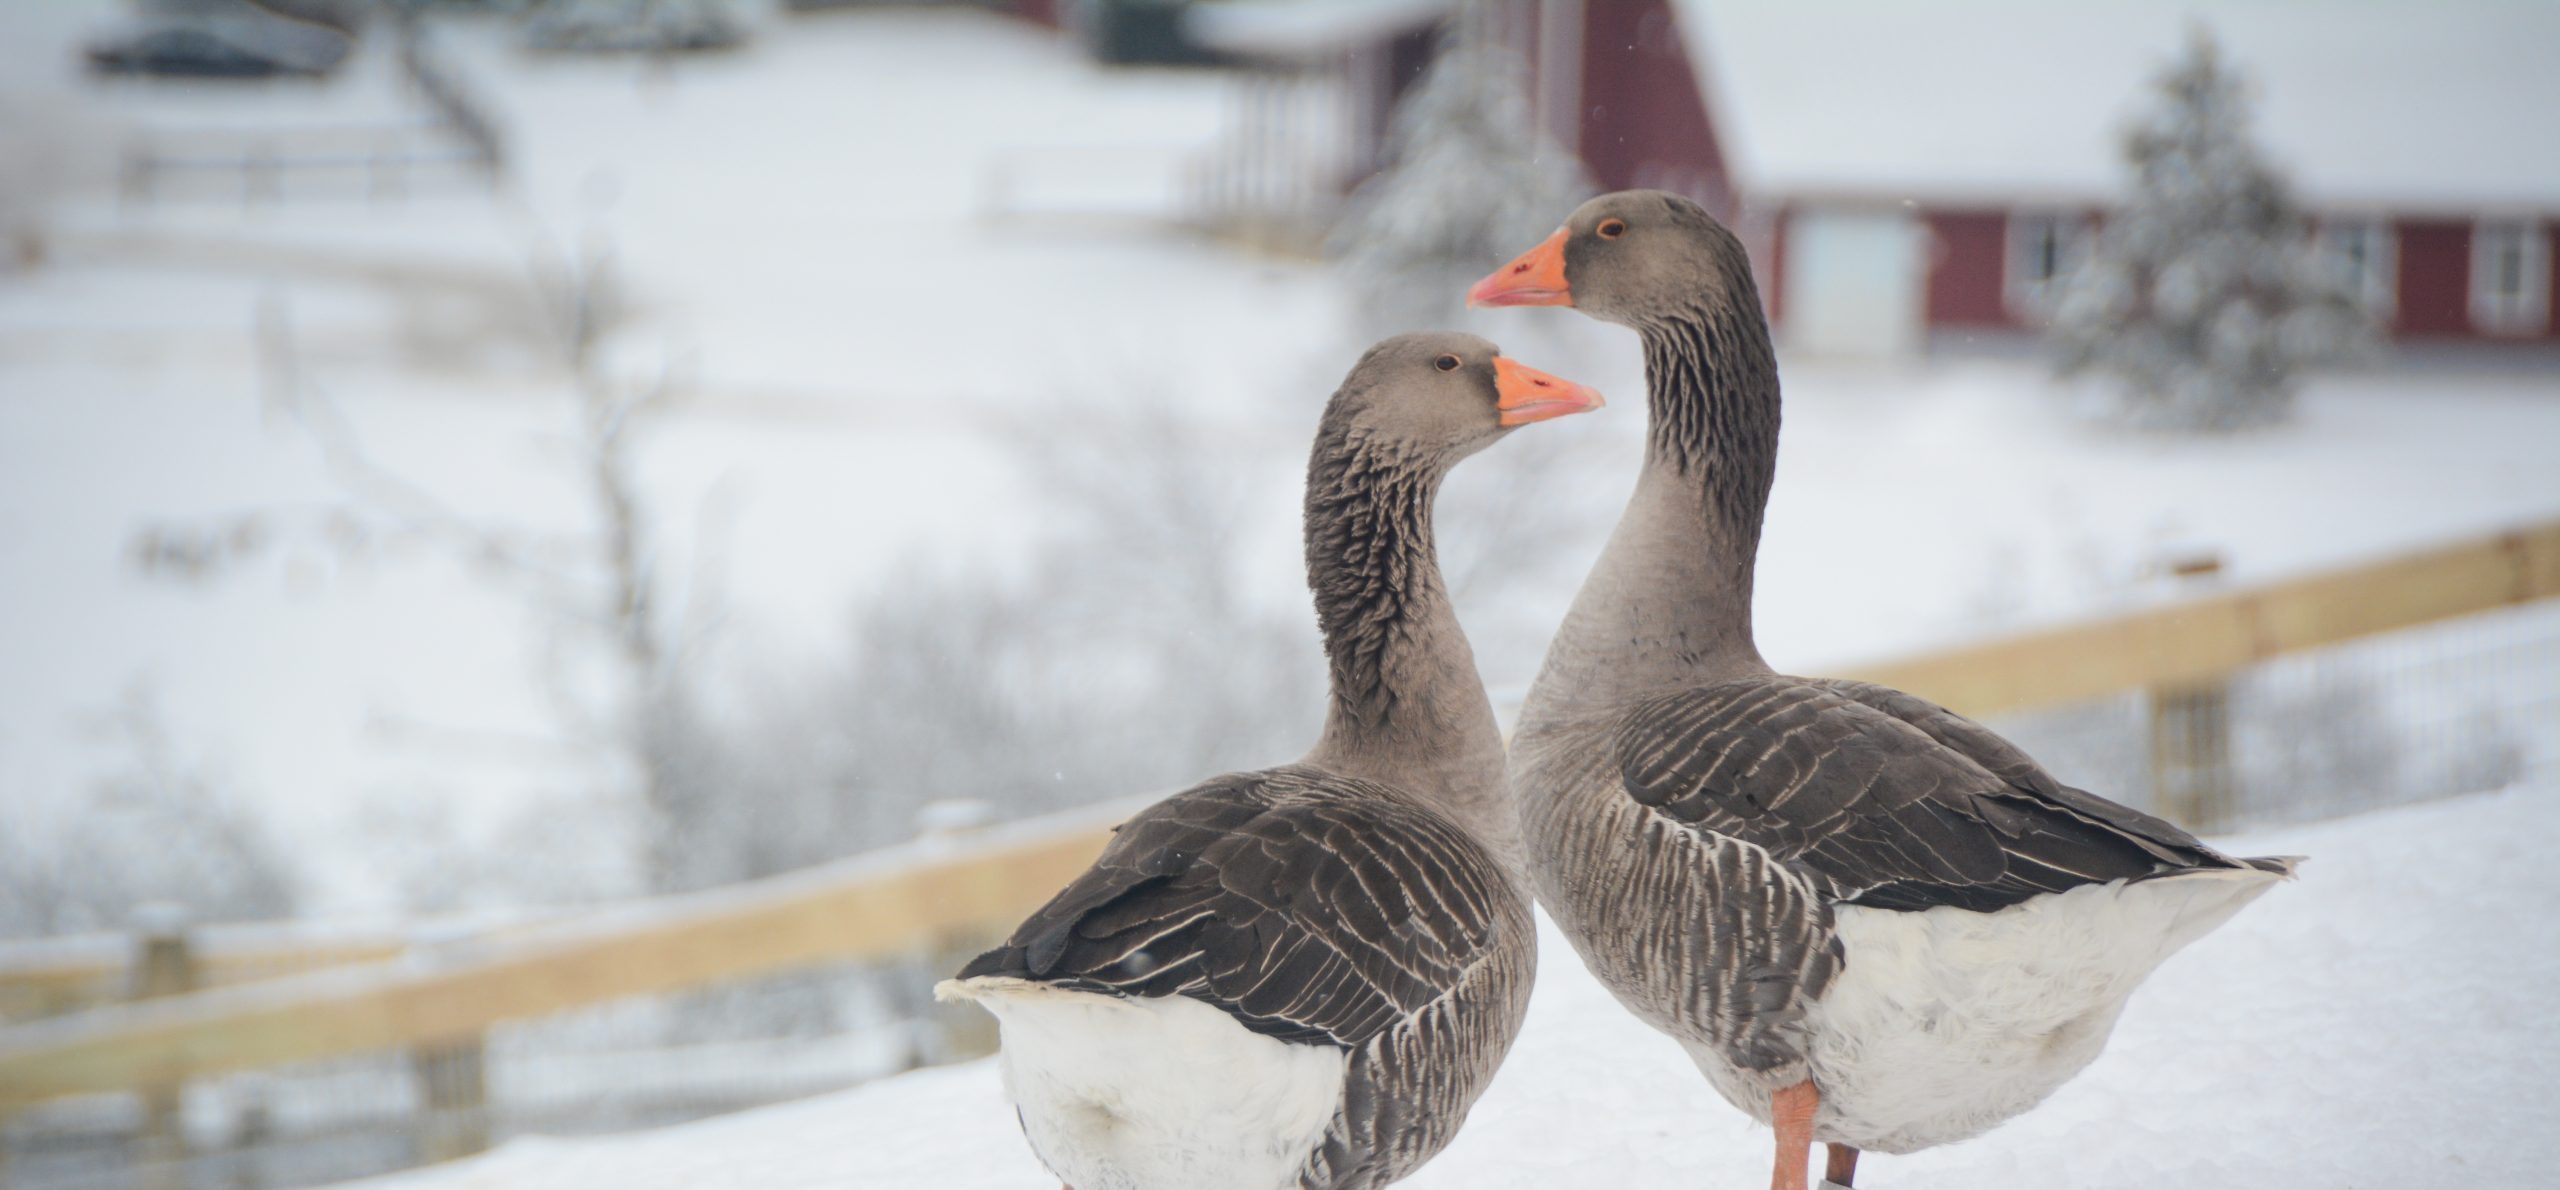 Willie and Reba Geese at Farm Sanctuary's New York shelter